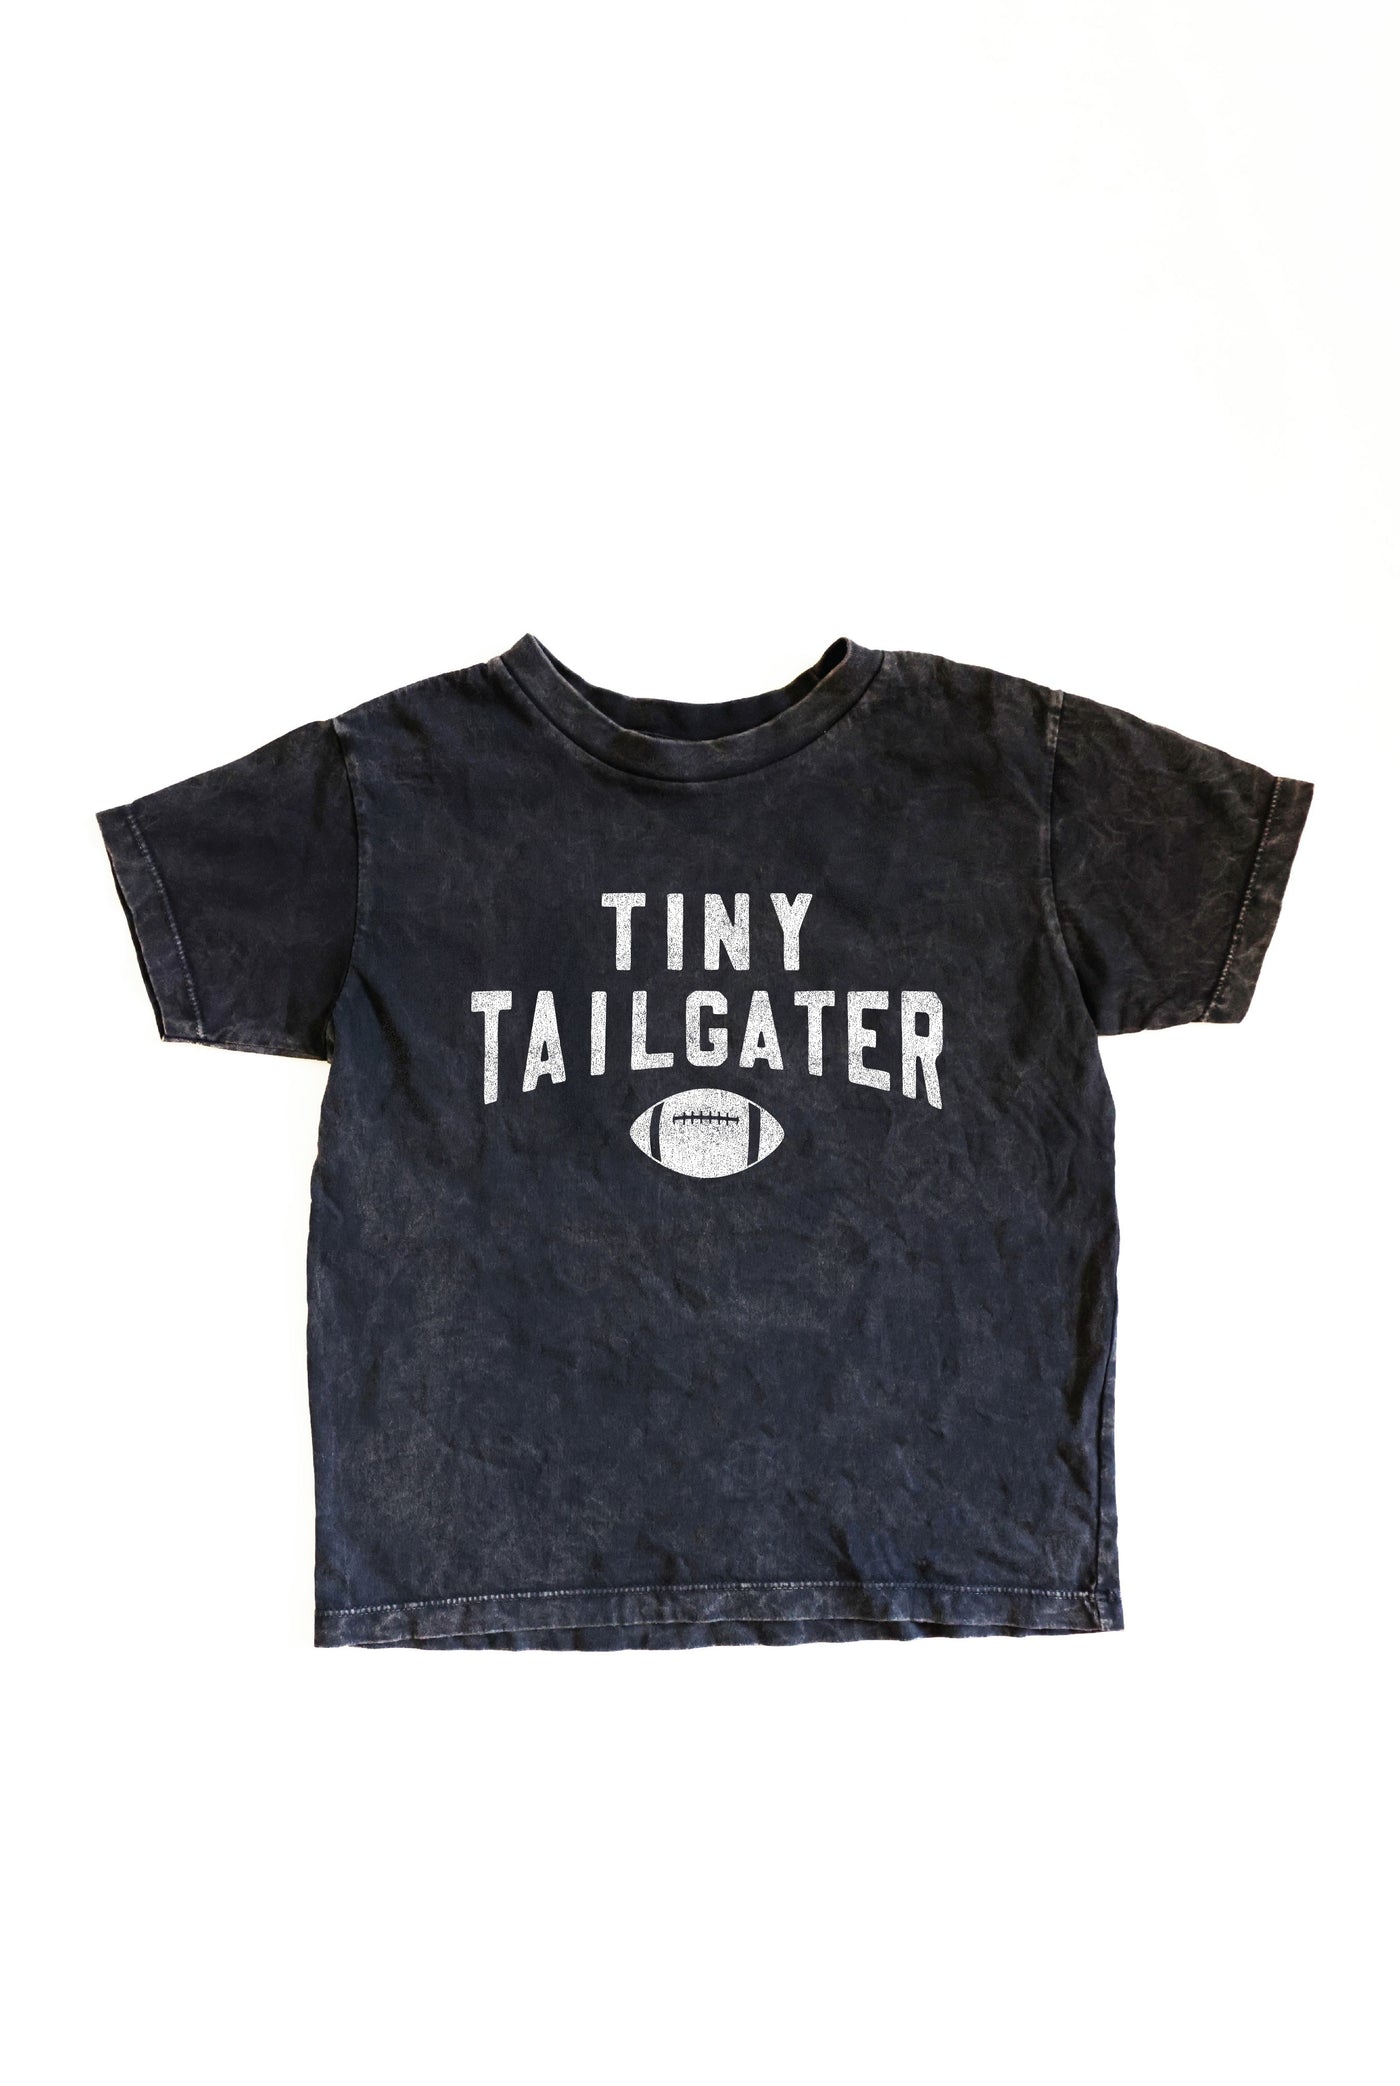 Tiny Tailgater Toddler Washed Graphic Top